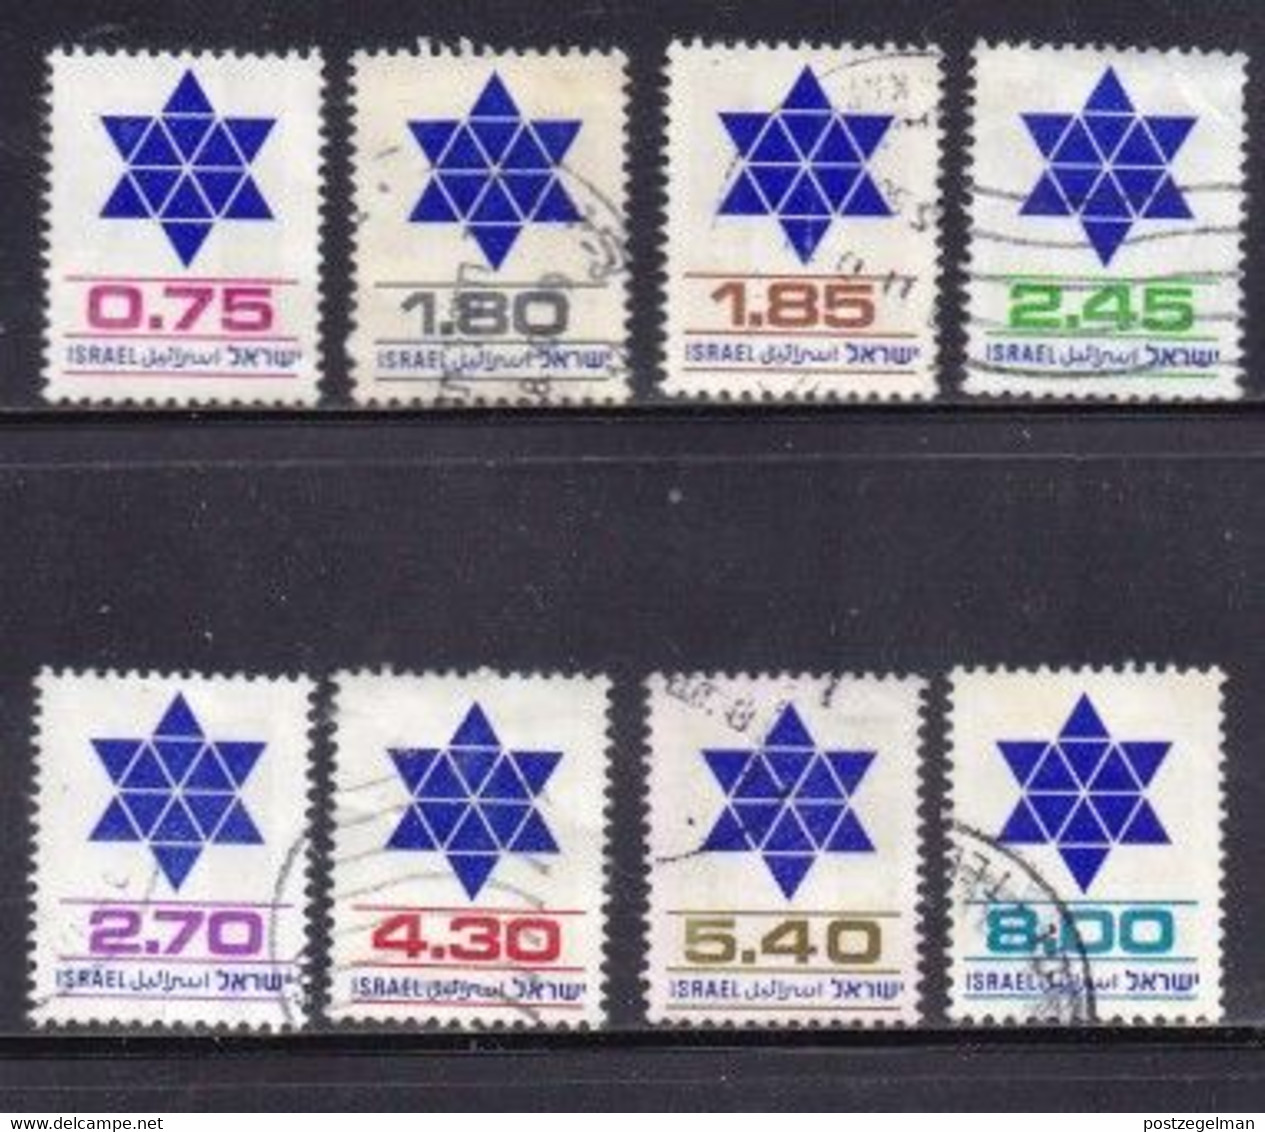 ISRAEL, 1975, Used Stamp(s)  With  Tab, Star Of David , SG Number(s) 620-625, Scannr. 19070 - Usados (con Tab)